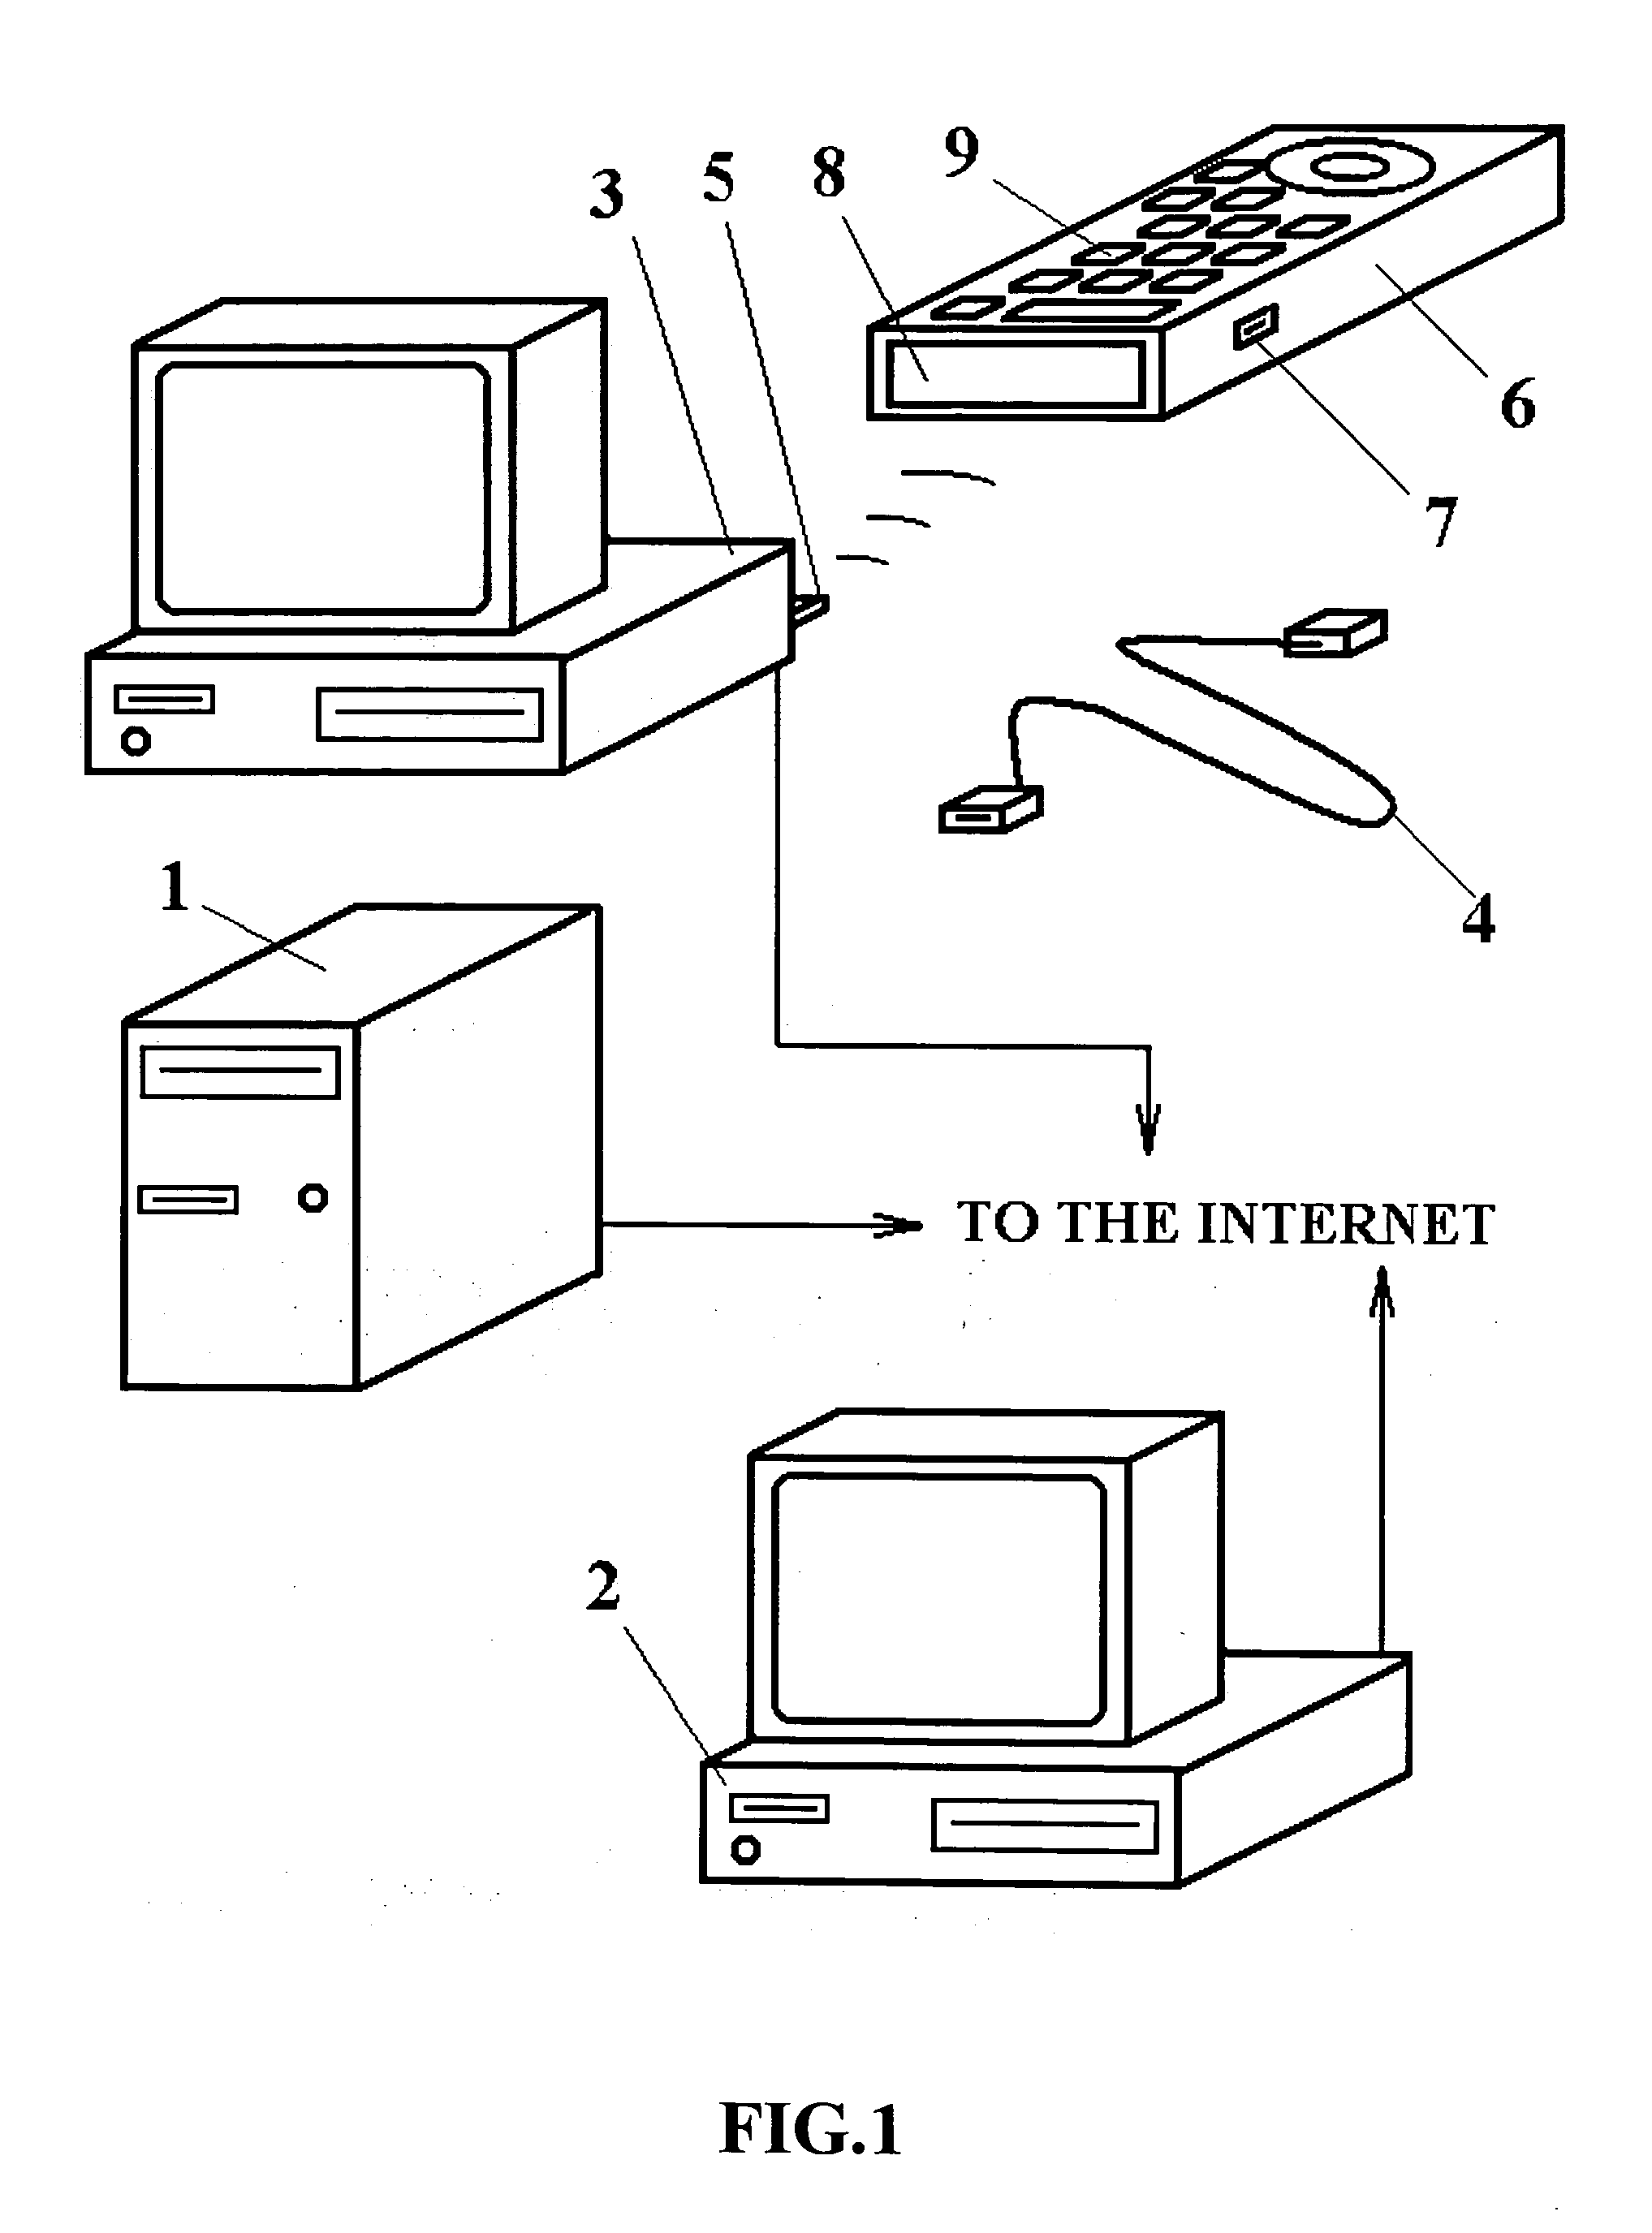 Programming system for remote control devices and method for operating said system